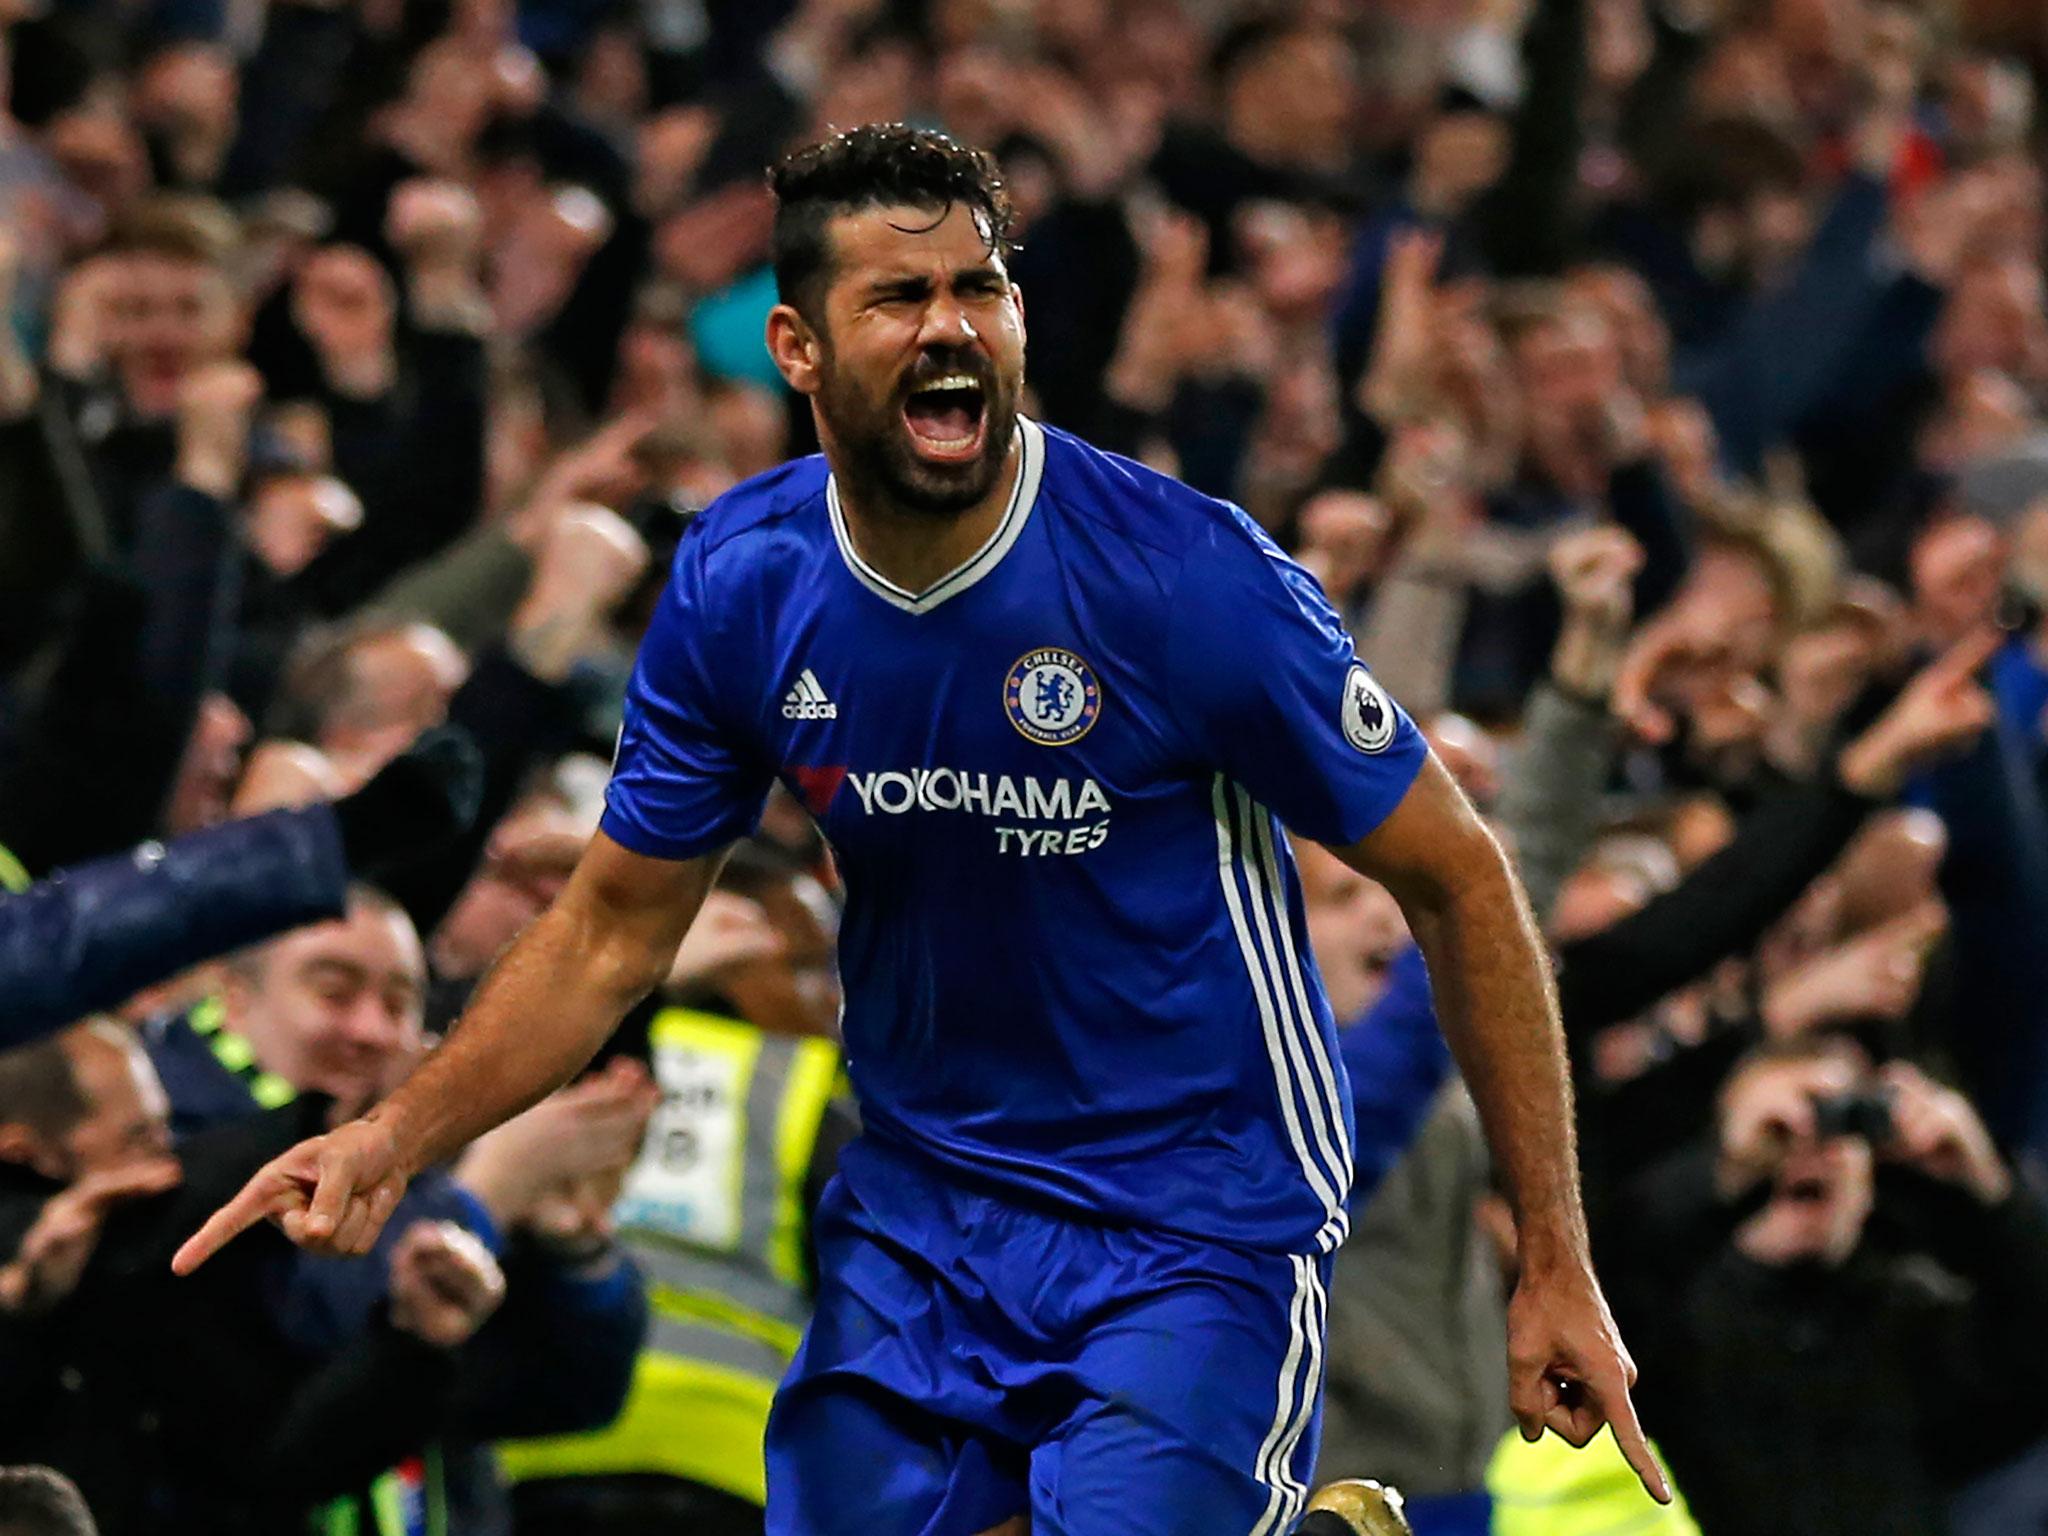 Diego Costa celebrates scoring Chelsea's fourth goal in the 4-2 victory over Stoke City